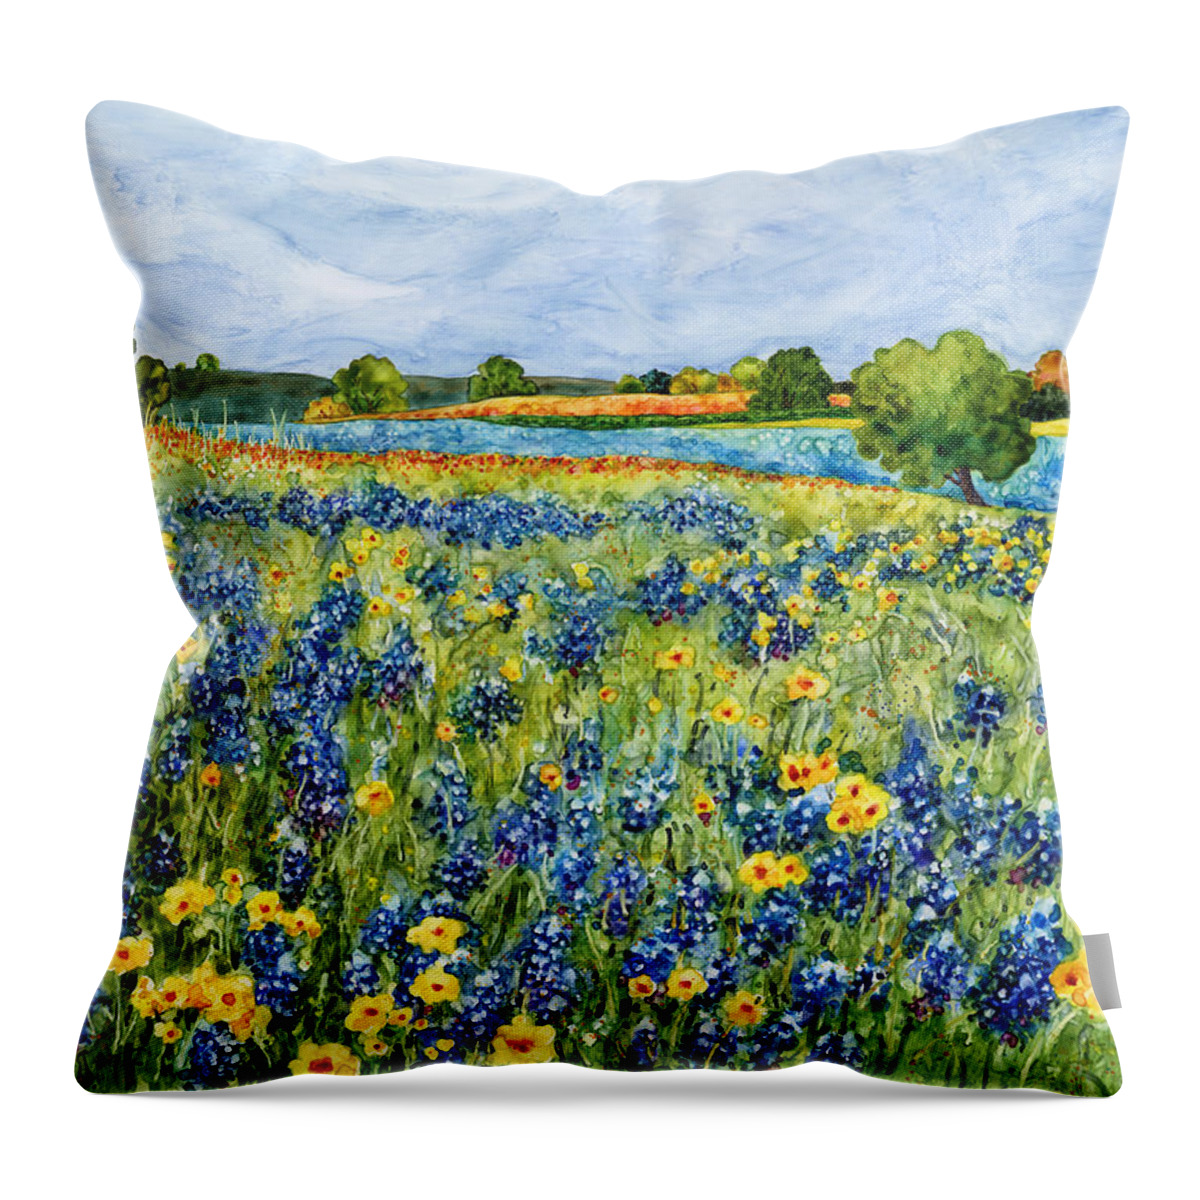 Bluebonnet Throw Pillow featuring the painting Painted Hills by Hailey E Herrera